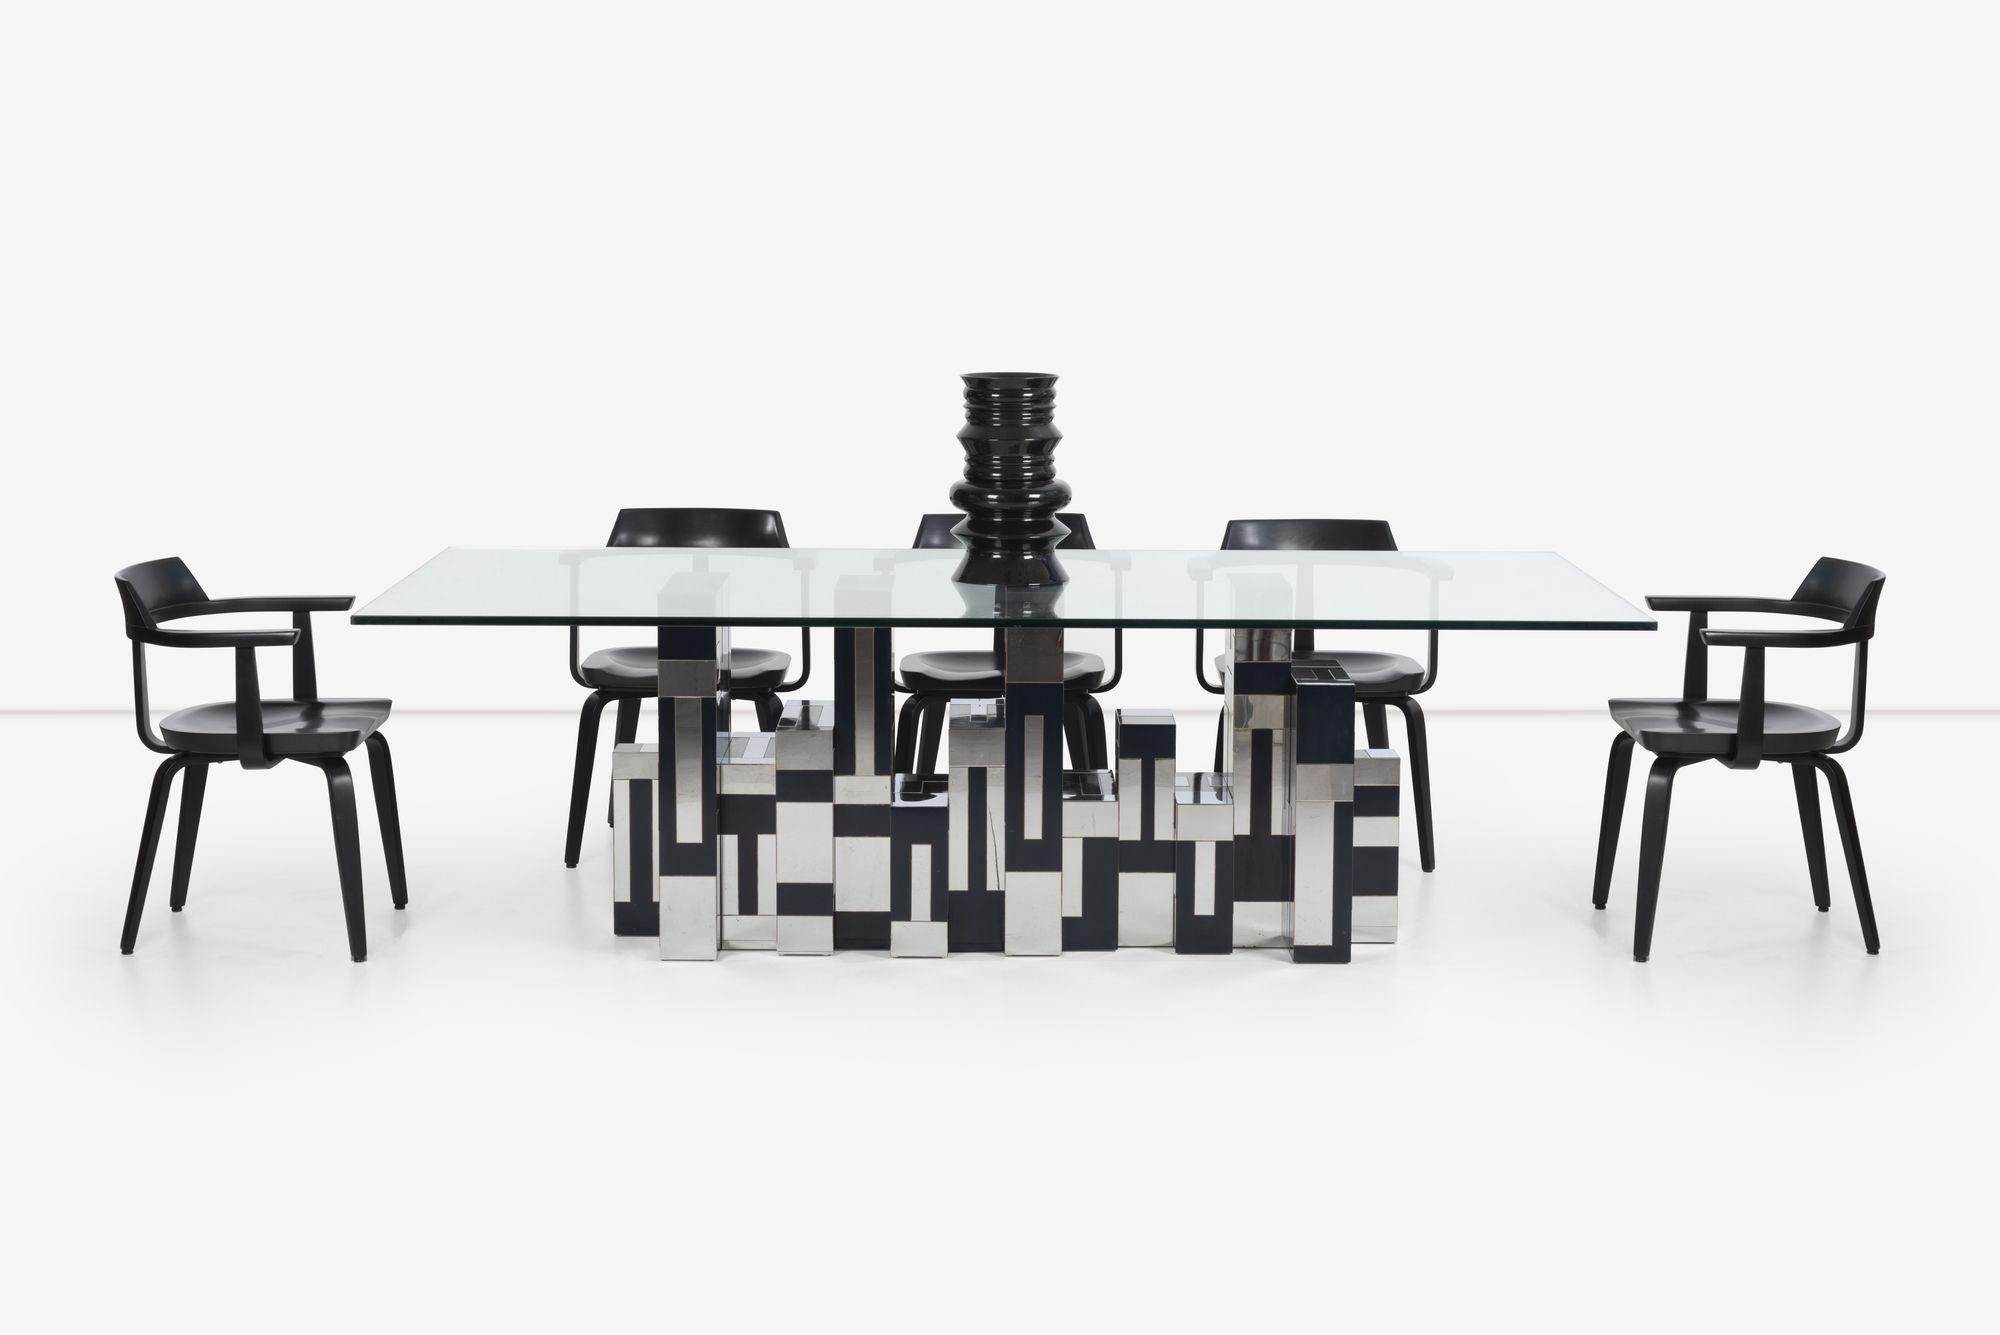 Paul Evans Studio for directional custom cityscape dining table, 1975 with custom colorway.
Series PE 400; 3/4